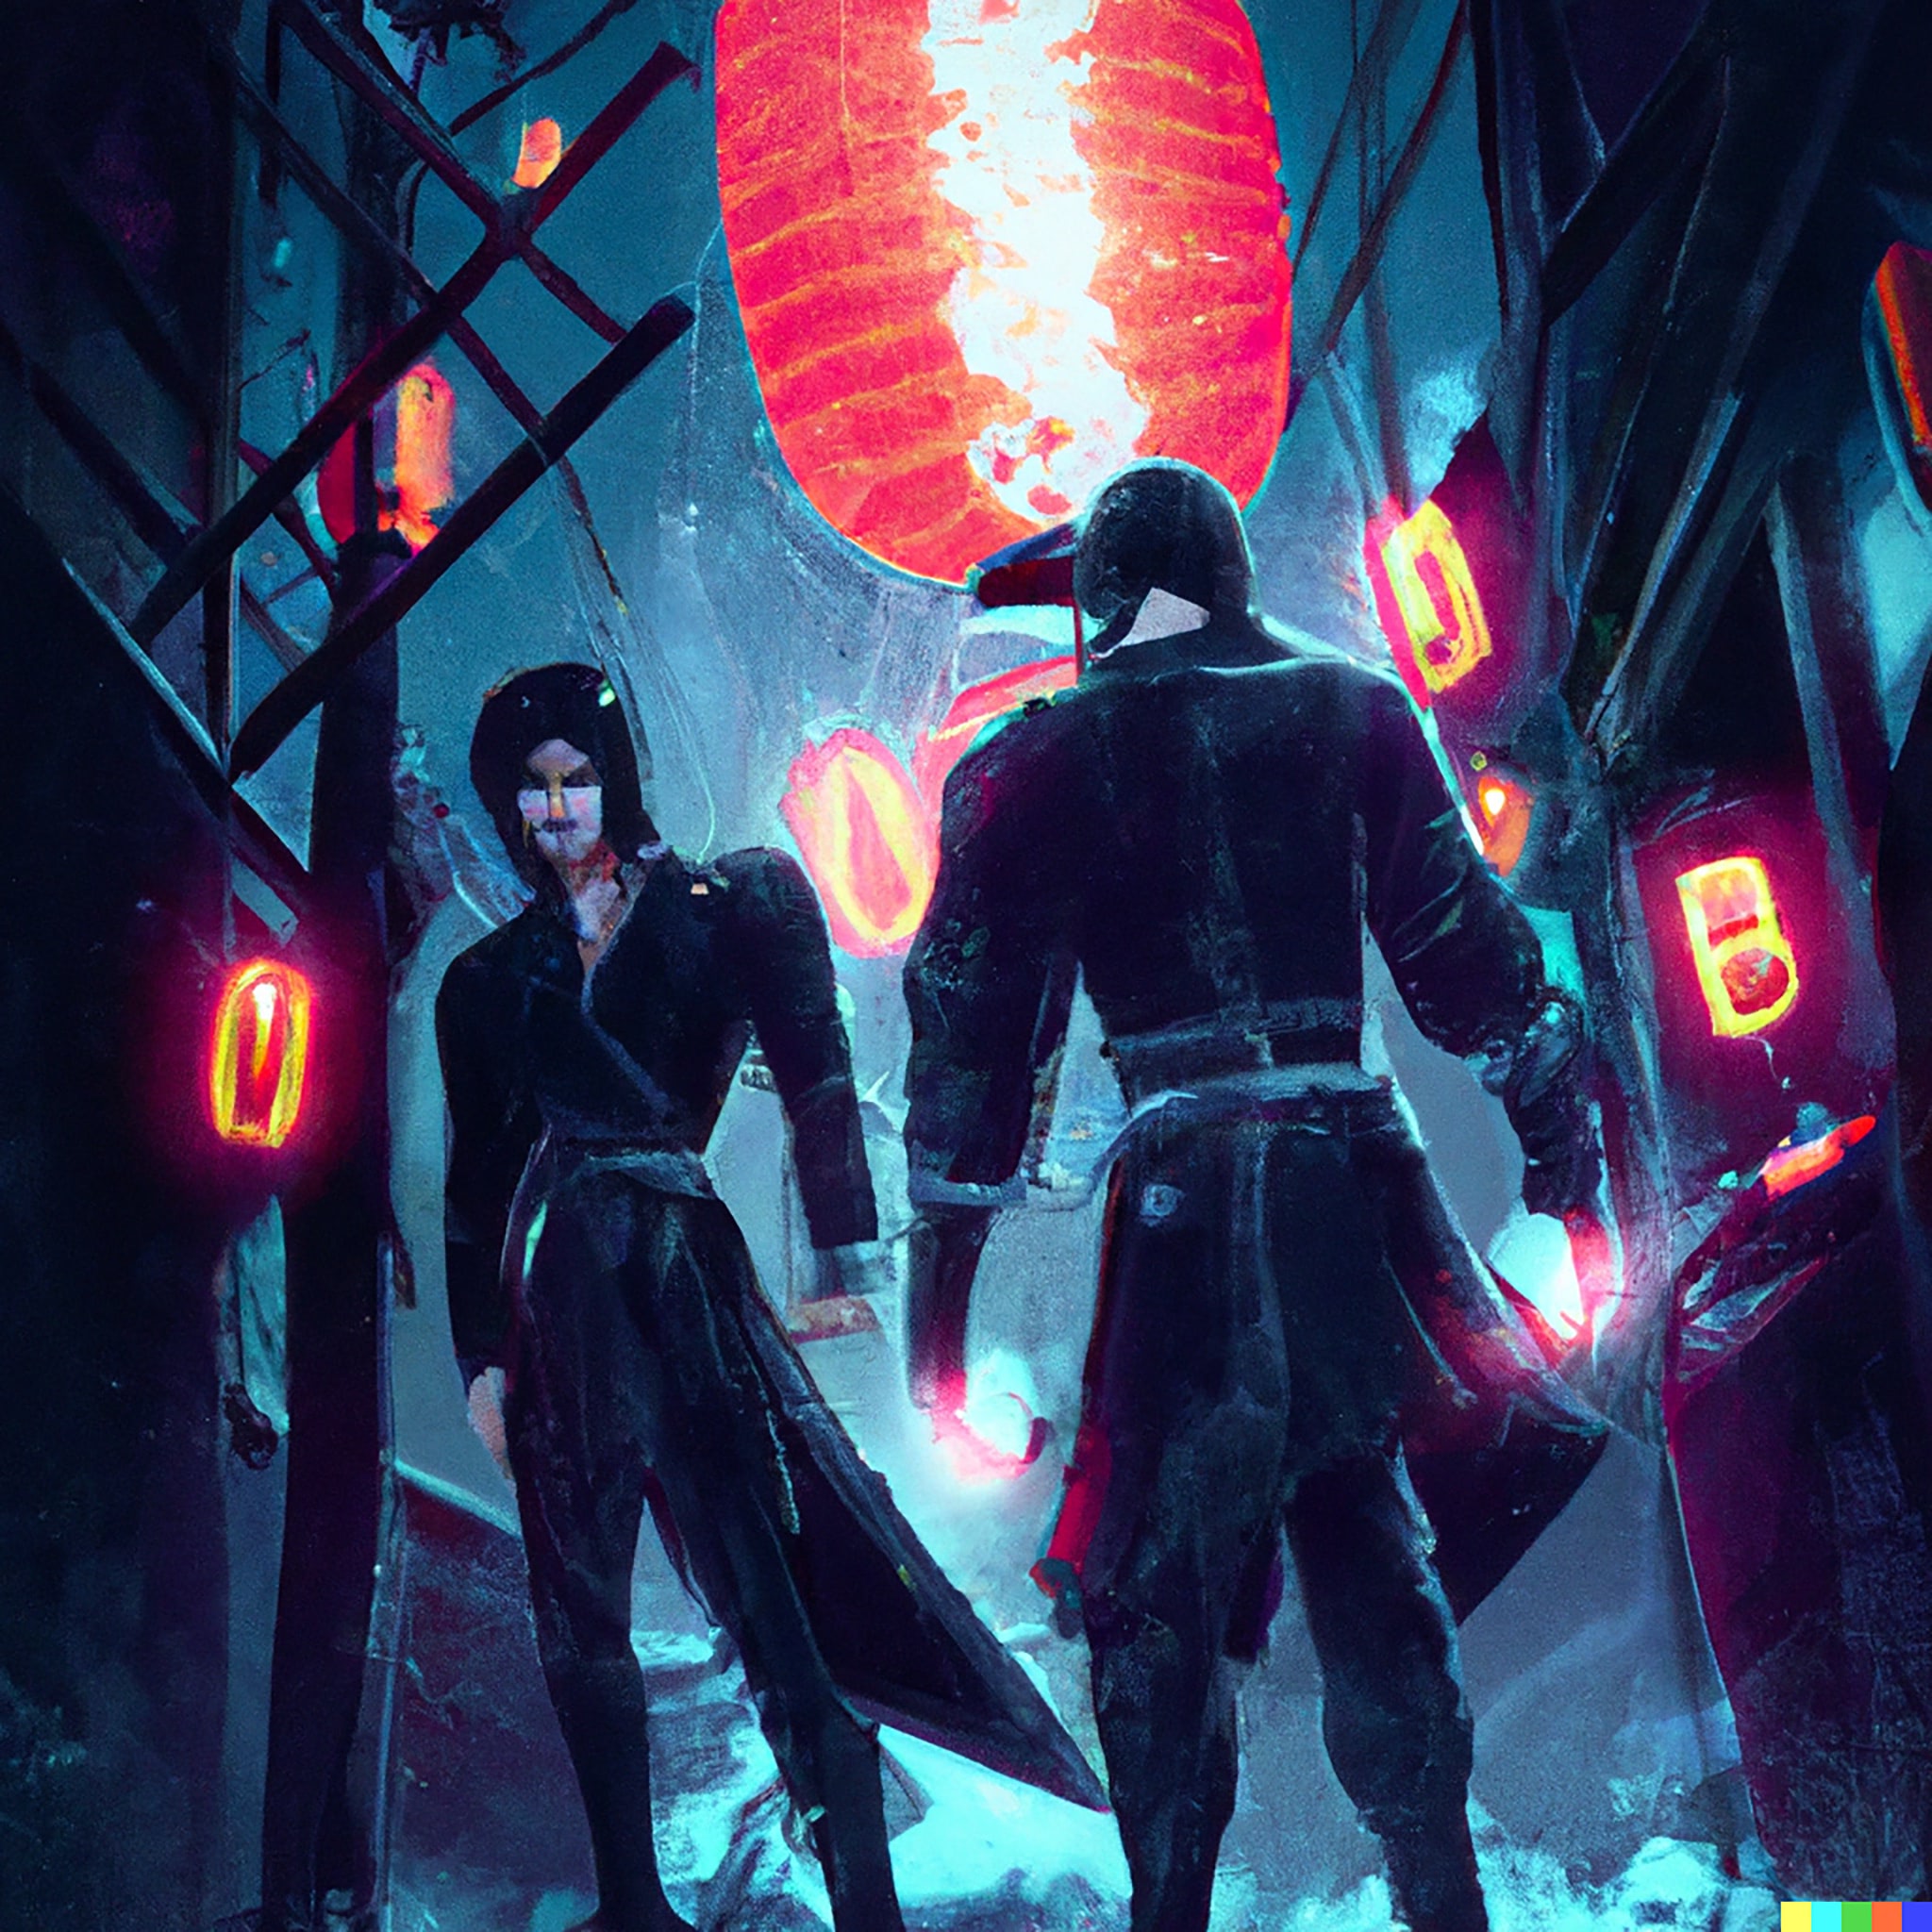 ninja-warrior-with-a-samurai-with-wild-clothes-in-a-alley-in-neo-tokyo-at-night-1